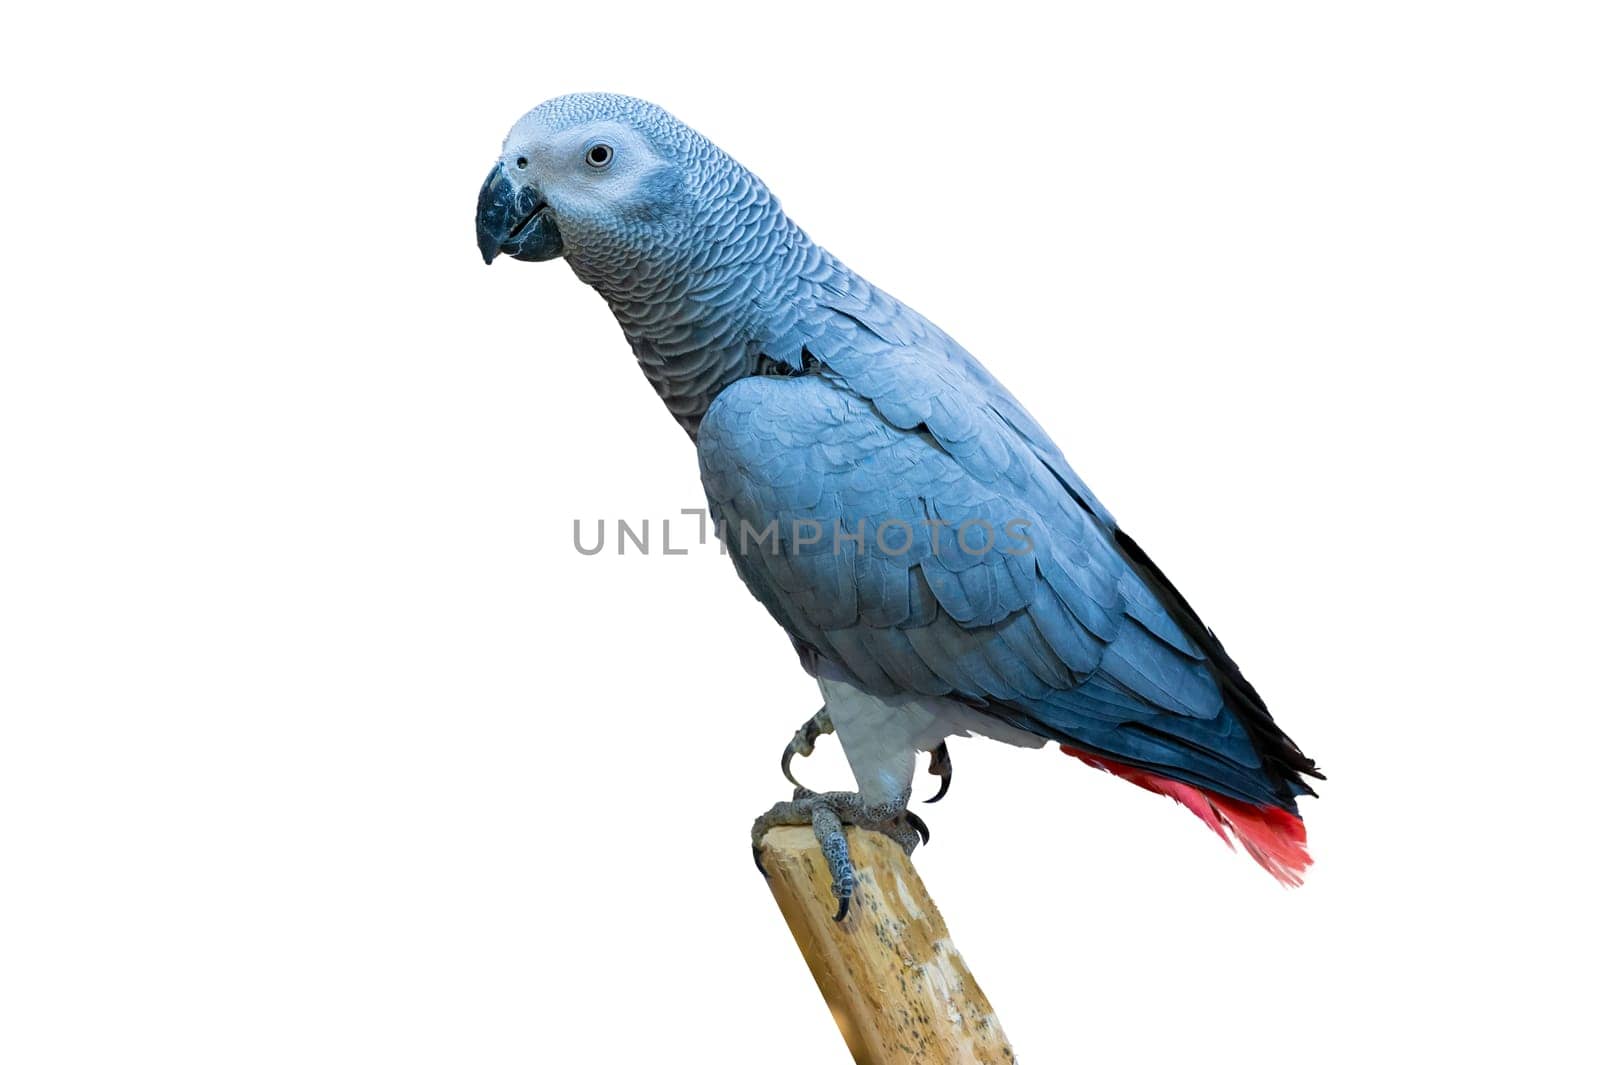 Grey parrot isolate parakeet perching on branch on white background isolate